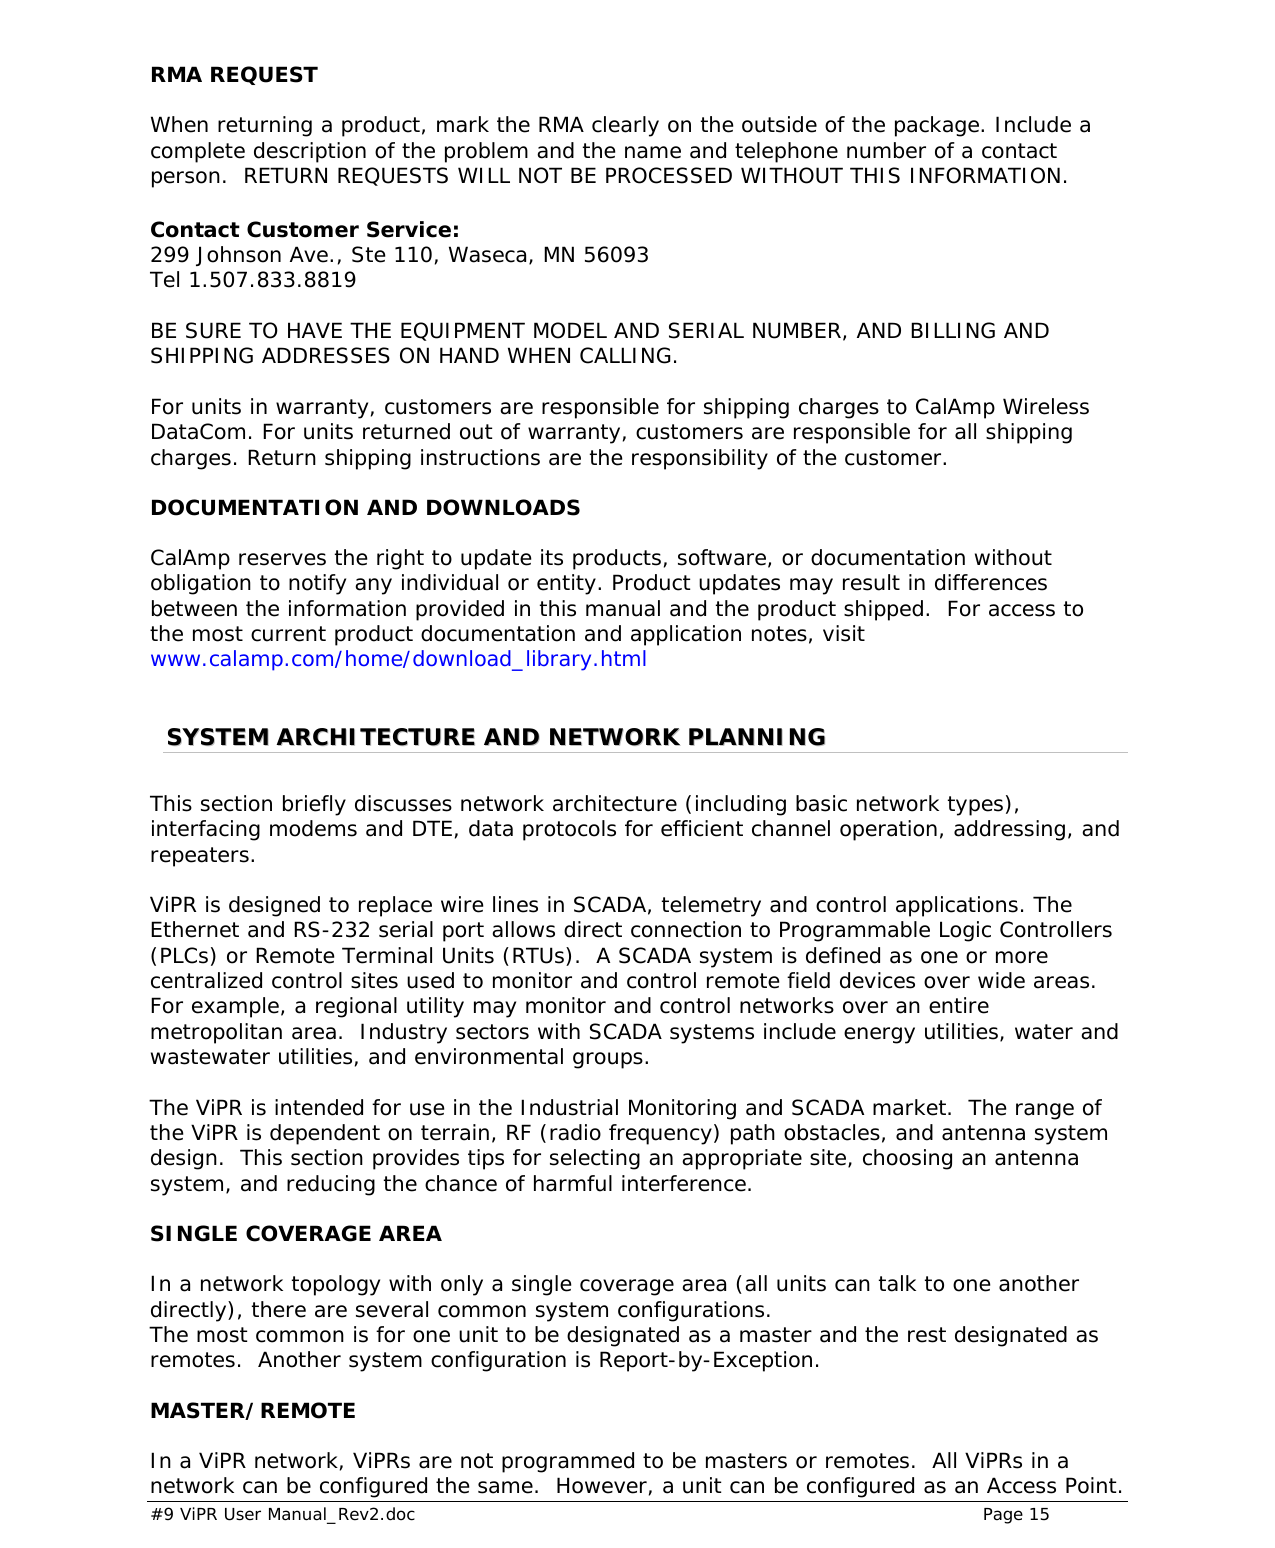  #9 ViPR User Manual_Rev2.doc    Page 15 RMA REQUEST When returning a product, mark the RMA clearly on the outside of the package. Include a complete description of the problem and the name and telephone number of a contact person.  RETURN REQUESTS WILL NOT BE PROCESSED WITHOUT THIS INFORMATION.  Contact Customer Service: 299 Johnson Ave., Ste 110, Waseca, MN 56093 Tel 1.507.833.8819    BE SURE TO HAVE THE EQUIPMENT MODEL AND SERIAL NUMBER, AND BILLING AND SHIPPING ADDRESSES ON HAND WHEN CALLING.    For units in warranty, customers are responsible for shipping charges to CalAmp Wireless DataCom. For units returned out of warranty, customers are responsible for all shipping charges. Return shipping instructions are the responsibility of the customer. DOCUMENTATION AND DOWNLOADS CalAmp reserves the right to update its products, software, or documentation without obligation to notify any individual or entity. Product updates may result in differences between the information provided in this manual and the product shipped.  For access to the most current product documentation and application notes, visit www.calamp.com/home/download_library.html   SSYYSSTTEEMM  AARRCCHHIITTEECCTTUURREE  AANNDD  NNEETTWWOORRKK  PPLLAANNNNIINNGG  This section briefly discusses network architecture (including basic network types), interfacing modems and DTE, data protocols for efficient channel operation, addressing, and repeaters.   ViPR is designed to replace wire lines in SCADA, telemetry and control applications. The Ethernet and RS-232 serial port allows direct connection to Programmable Logic Controllers (PLCs) or Remote Terminal Units (RTUs).  A SCADA system is defined as one or more centralized control sites used to monitor and control remote field devices over wide areas.  For example, a regional utility may monitor and control networks over an entire metropolitan area.  Industry sectors with SCADA systems include energy utilities, water and wastewater utilities, and environmental groups.  The ViPR is intended for use in the Industrial Monitoring and SCADA market.  The range of the ViPR is dependent on terrain, RF (radio frequency) path obstacles, and antenna system design.  This section provides tips for selecting an appropriate site, choosing an antenna system, and reducing the chance of harmful interference.  SINGLE COVERAGE AREA In a network topology with only a single coverage area (all units can talk to one another directly), there are several common system configurations. The most common is for one unit to be designated as a master and the rest designated as remotes.  Another system configuration is Report-by-Exception.  MASTER/REMOTE In a ViPR network, ViPRs are not programmed to be masters or remotes.  All ViPRs in a network can be configured the same.  However, a unit can be configured as an Access Point.  